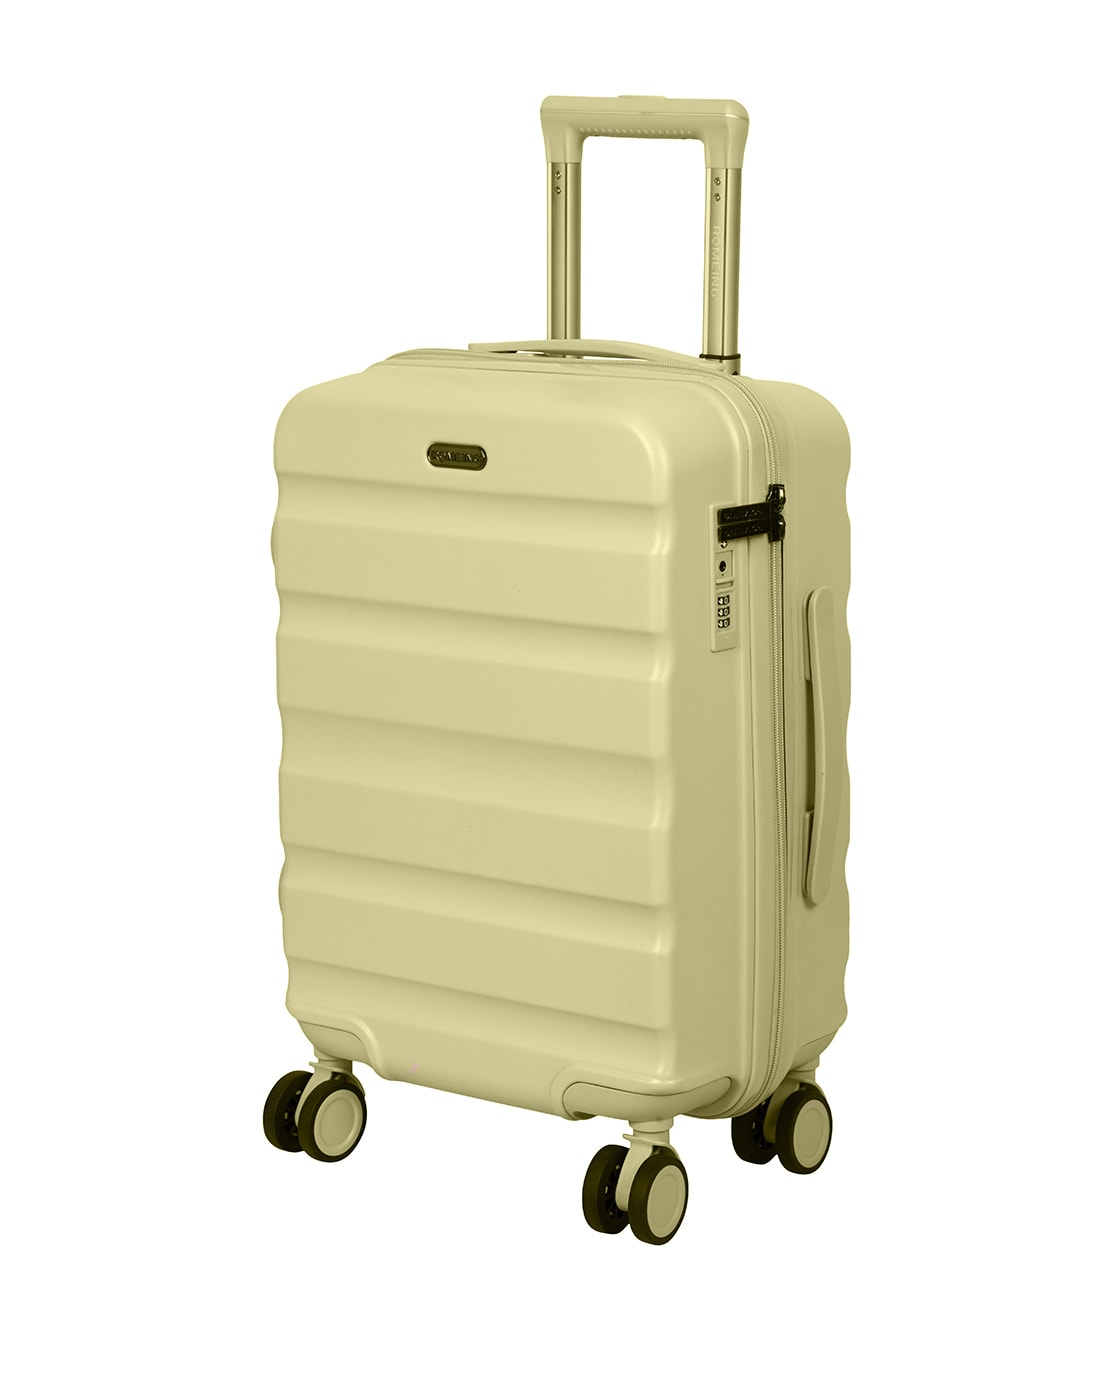 Golden Luggage trolley bag with digital weighing scale in built - YouTube